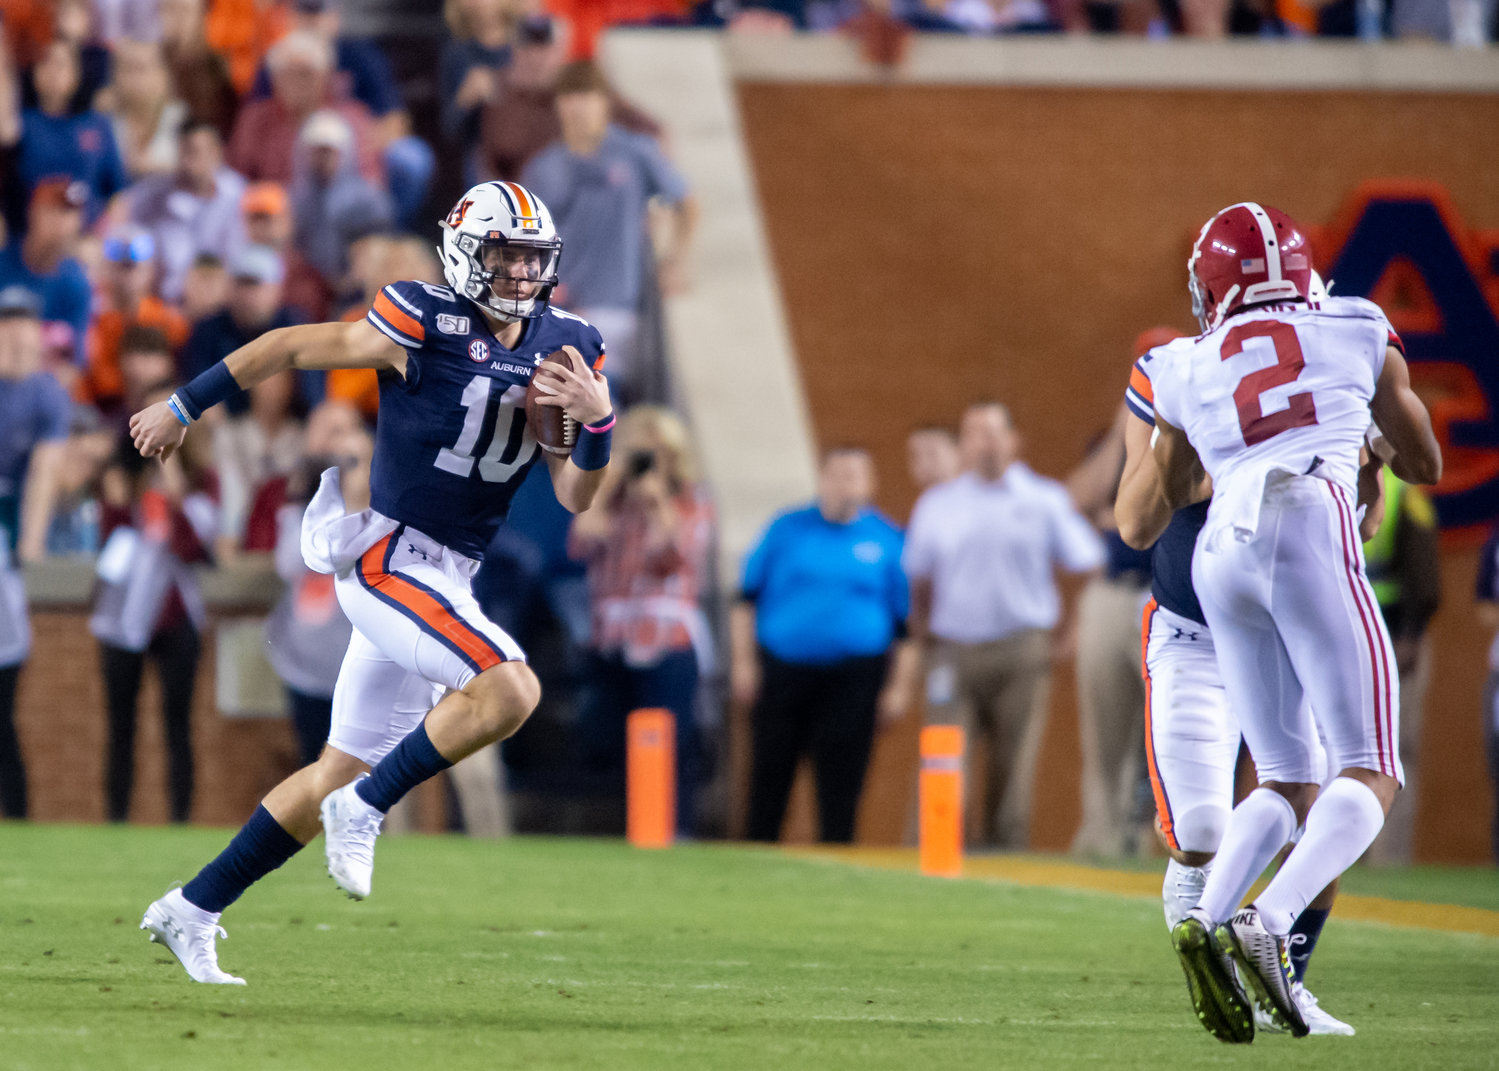 Auburn Tigers quarterback Bo Nix (10) runs for a first down during the second half of Saturday's game, at Jordan-Hare Stadium in Auburn, AL. Daily Mountain Eagle -  Jeff Johnsey